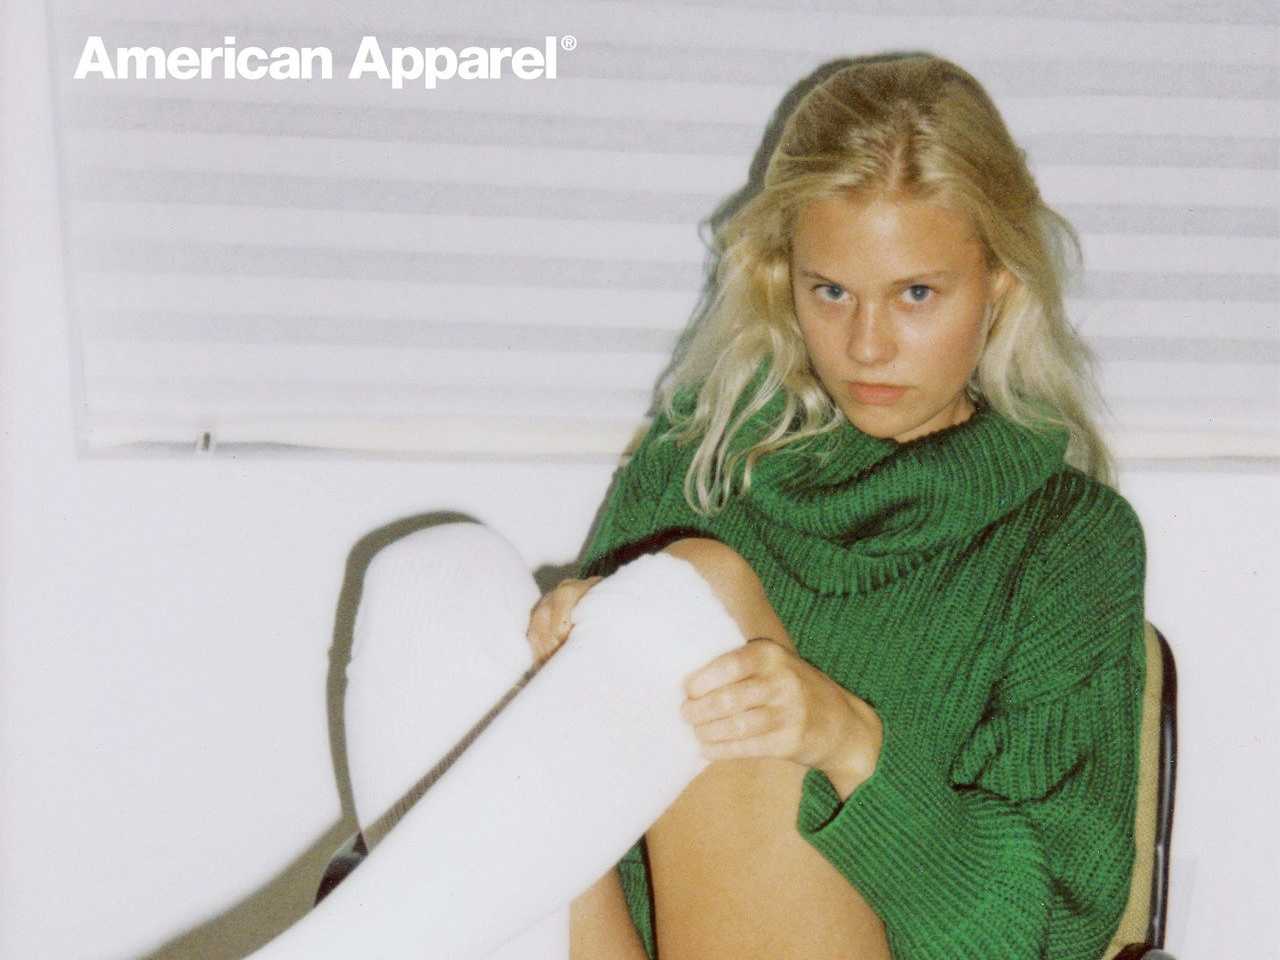 Second advert ban in a week for American Apparel after it 